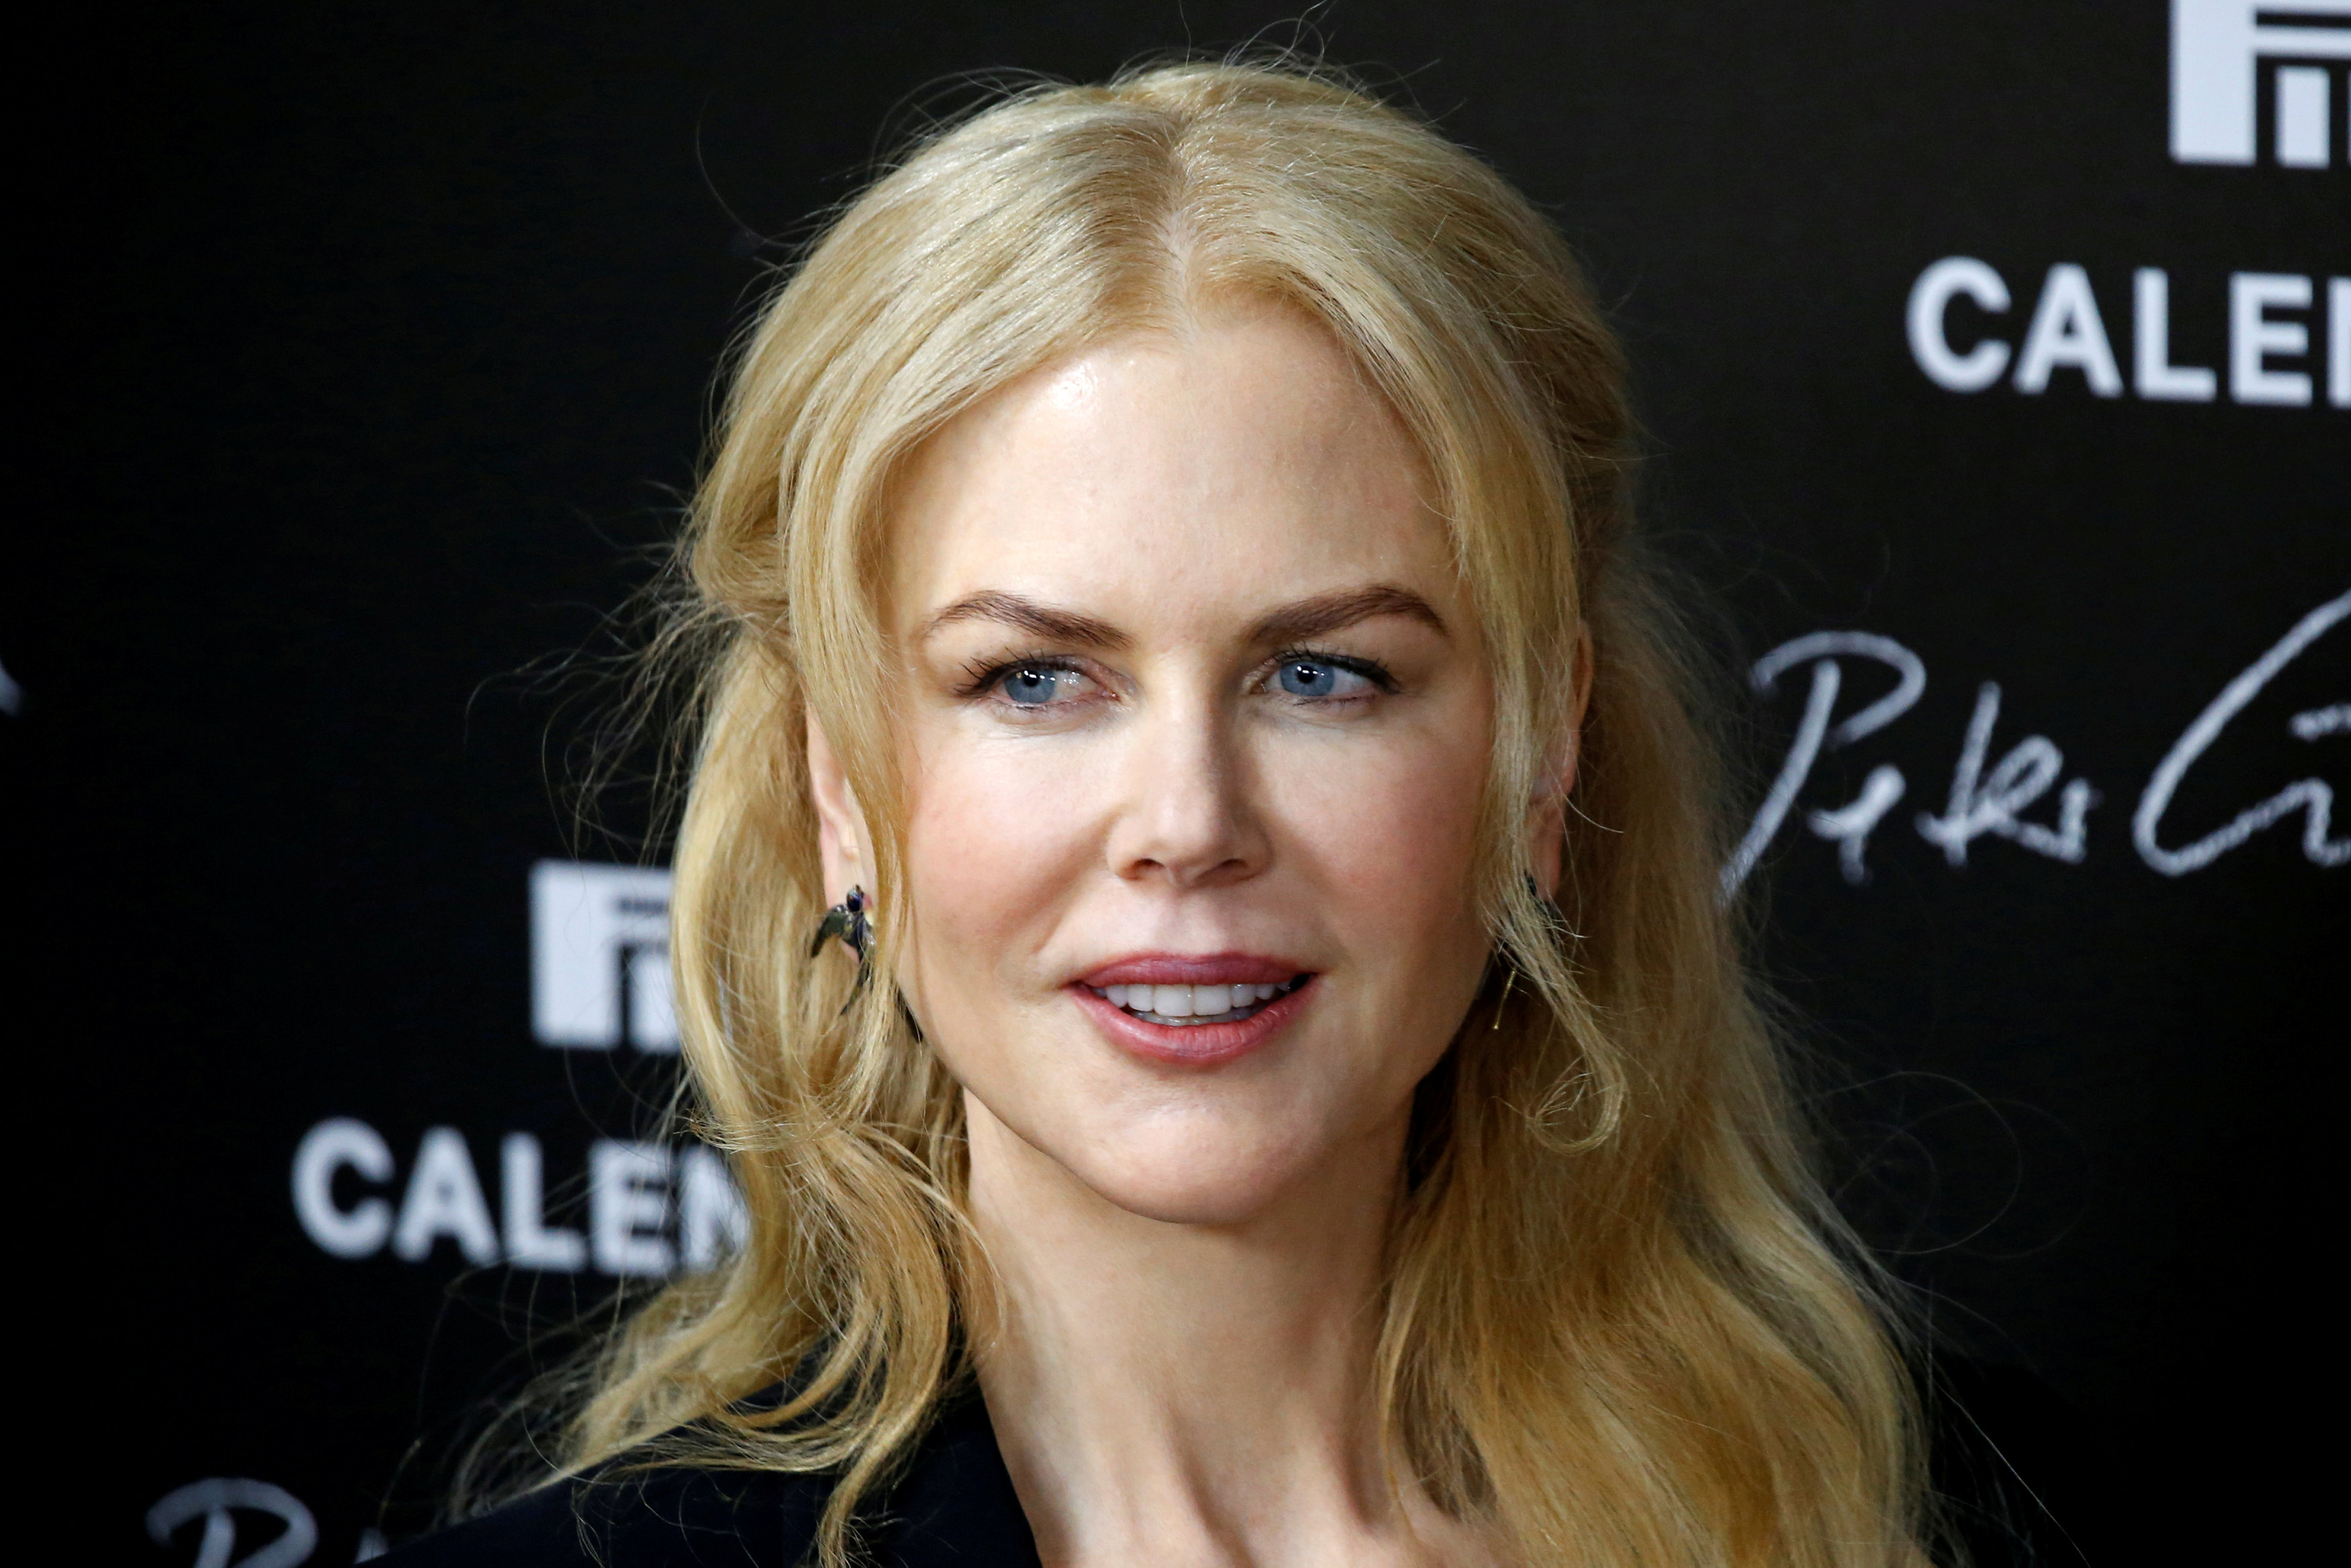 Nicole Kidman says Oscar nominations get more exciting as she ages